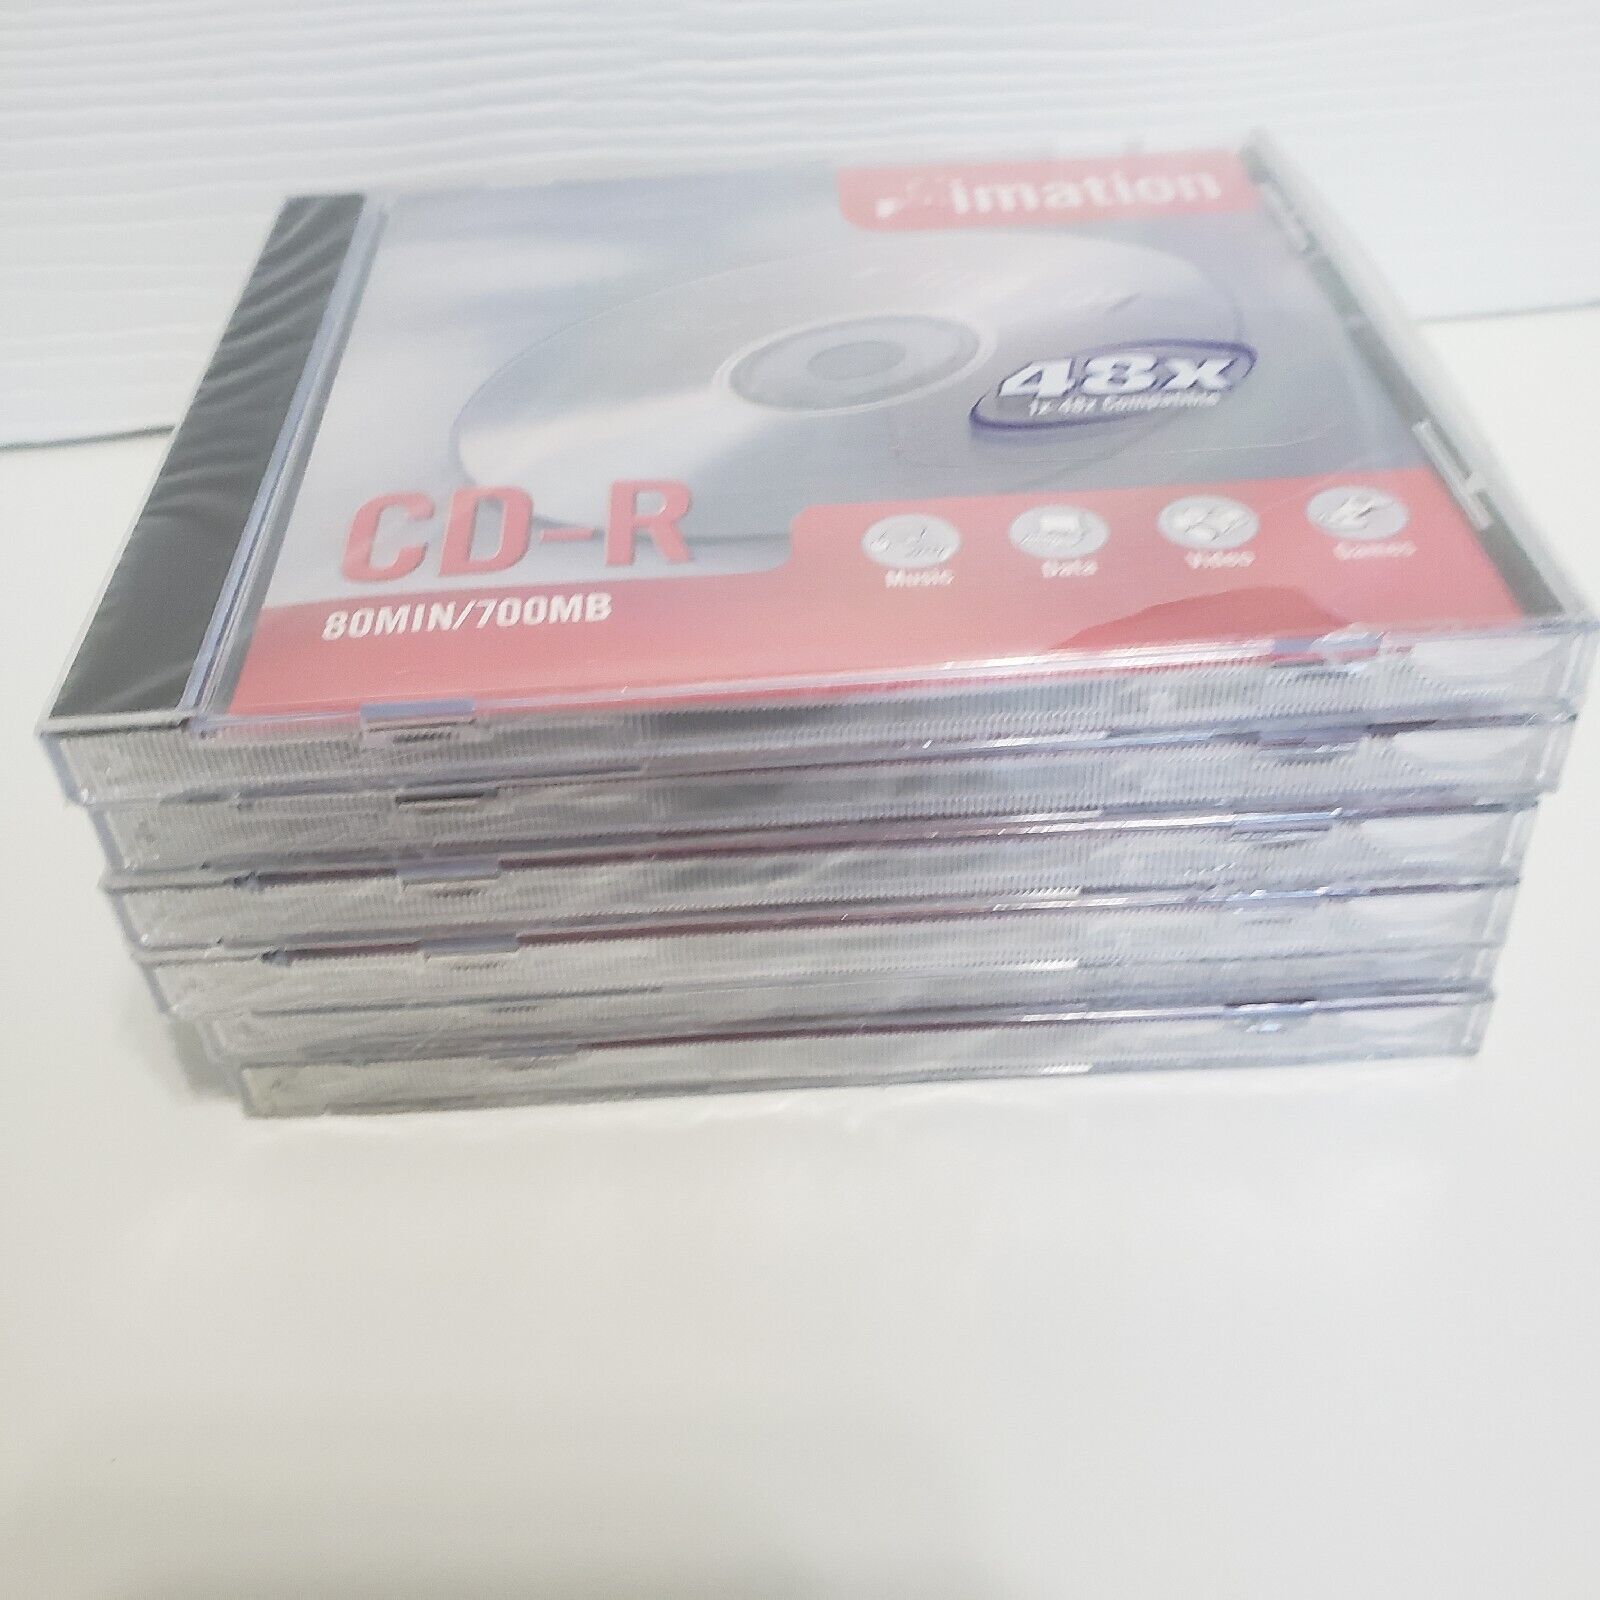 Imation CD-R 80MIN/700MB 48X Compact Discs New Sealed Lot of 6 